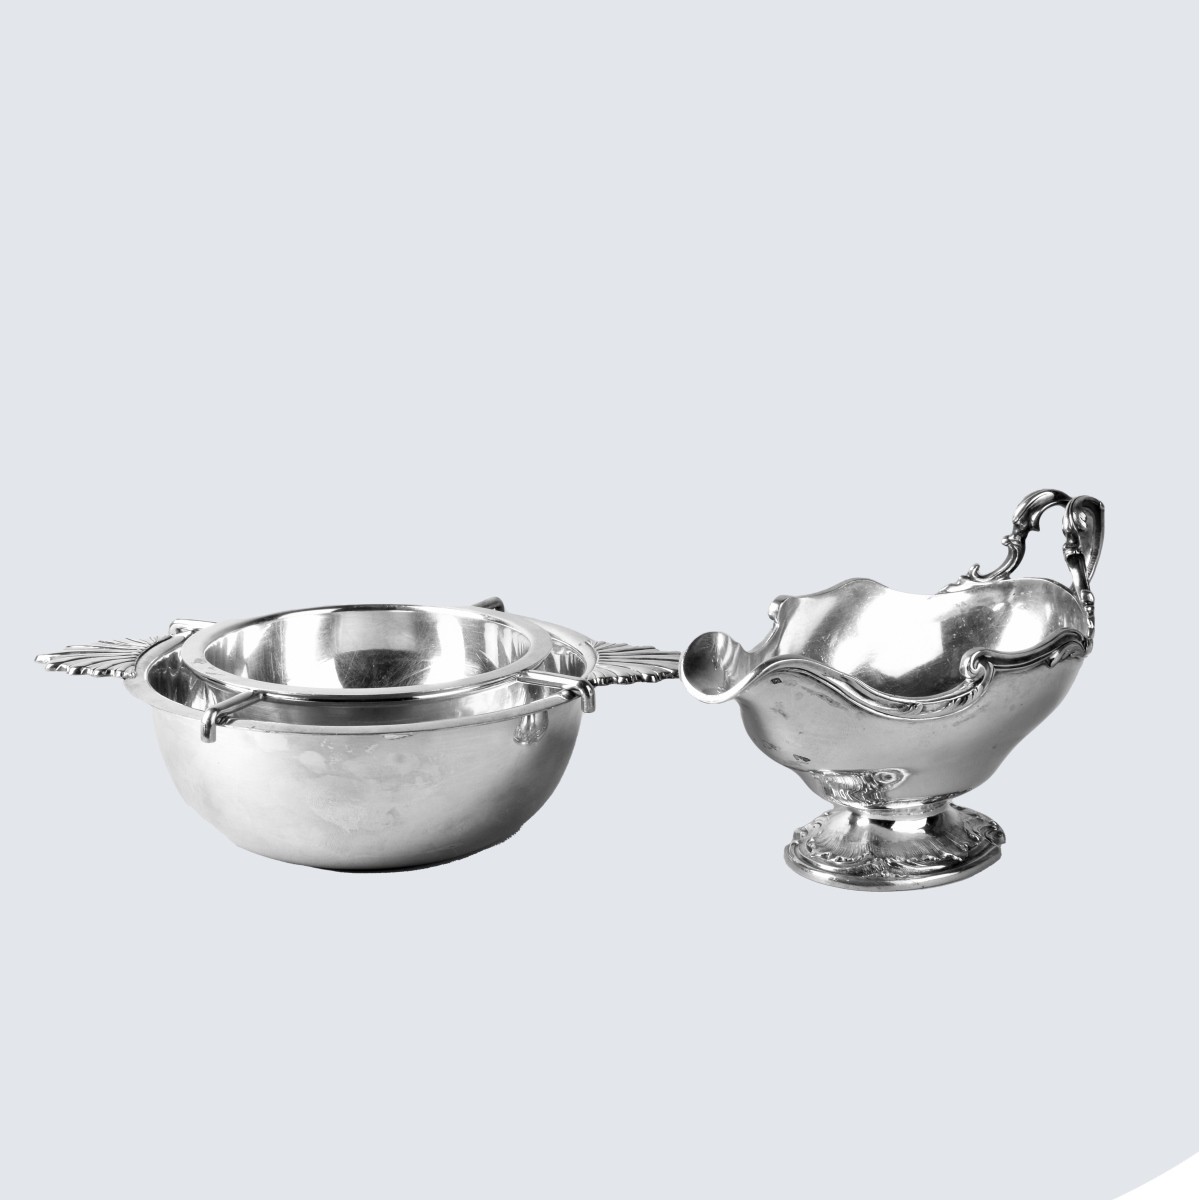 Grouping of Two Silverplated Serving Pieces